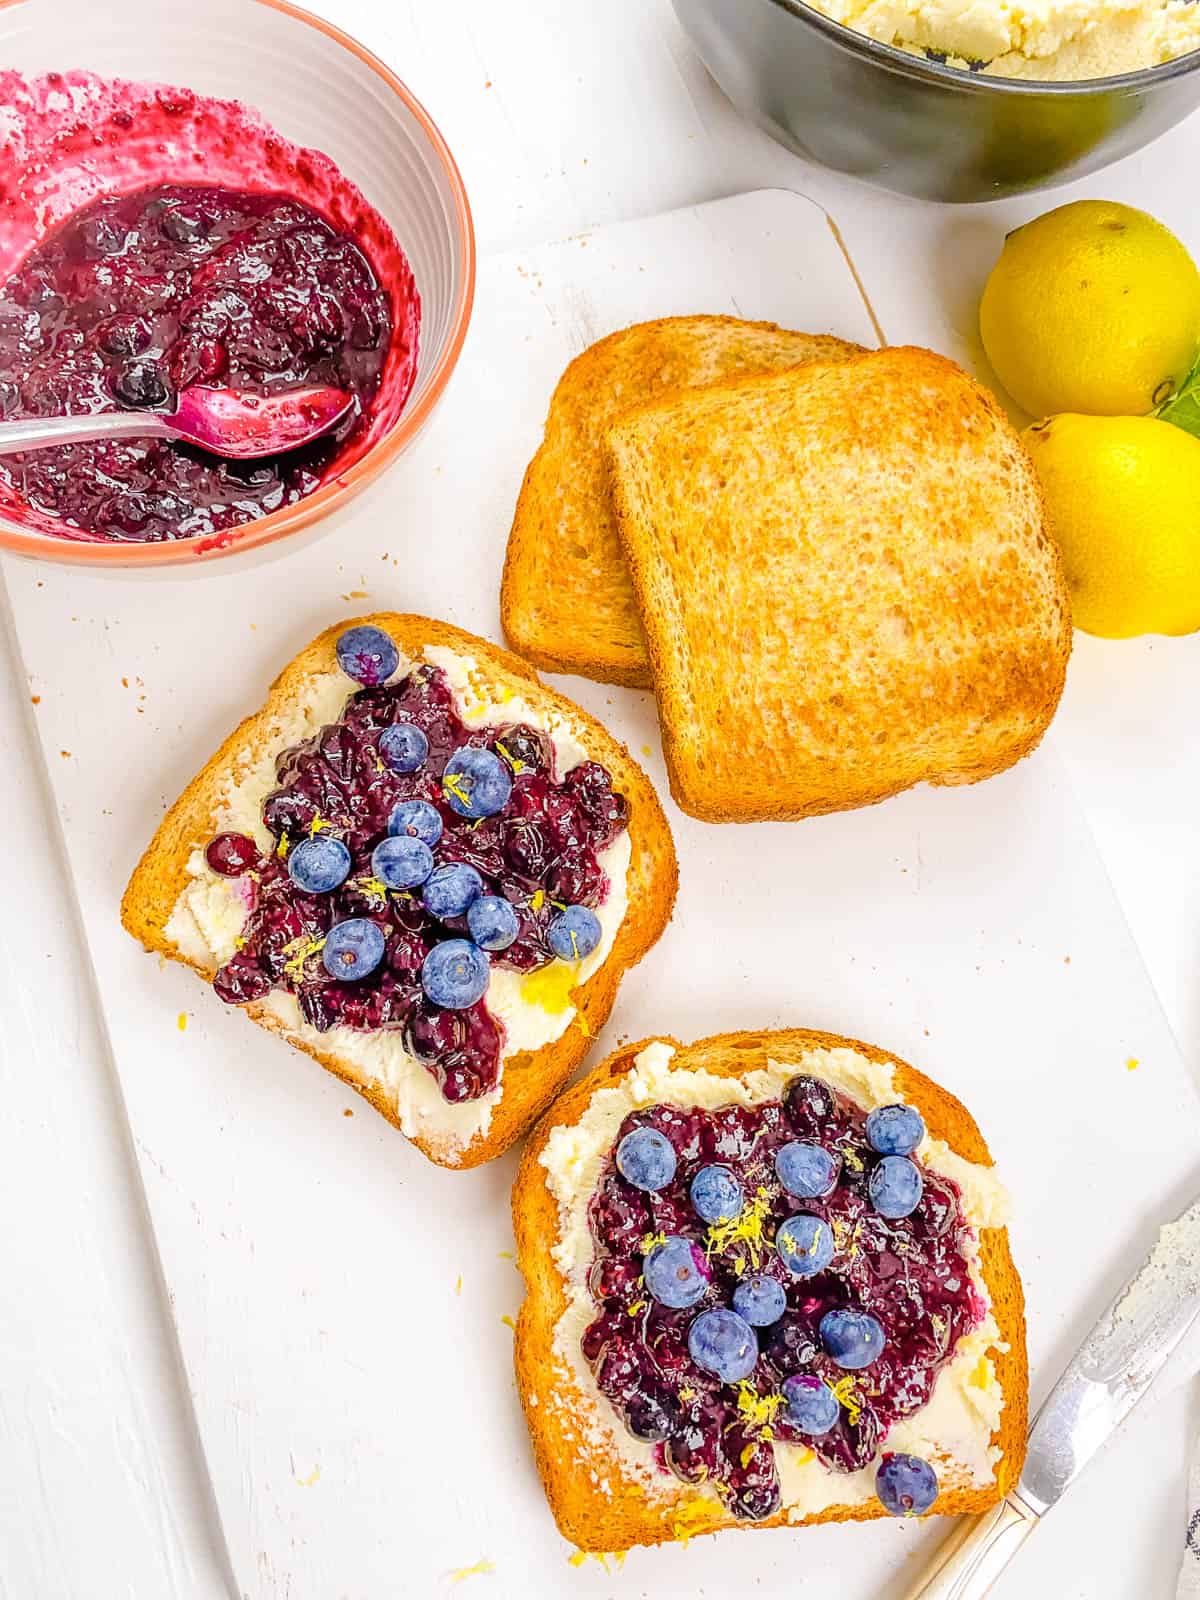 Cream cheese toast with blueberries (and 15 other topping ideas) on a white cutting board.